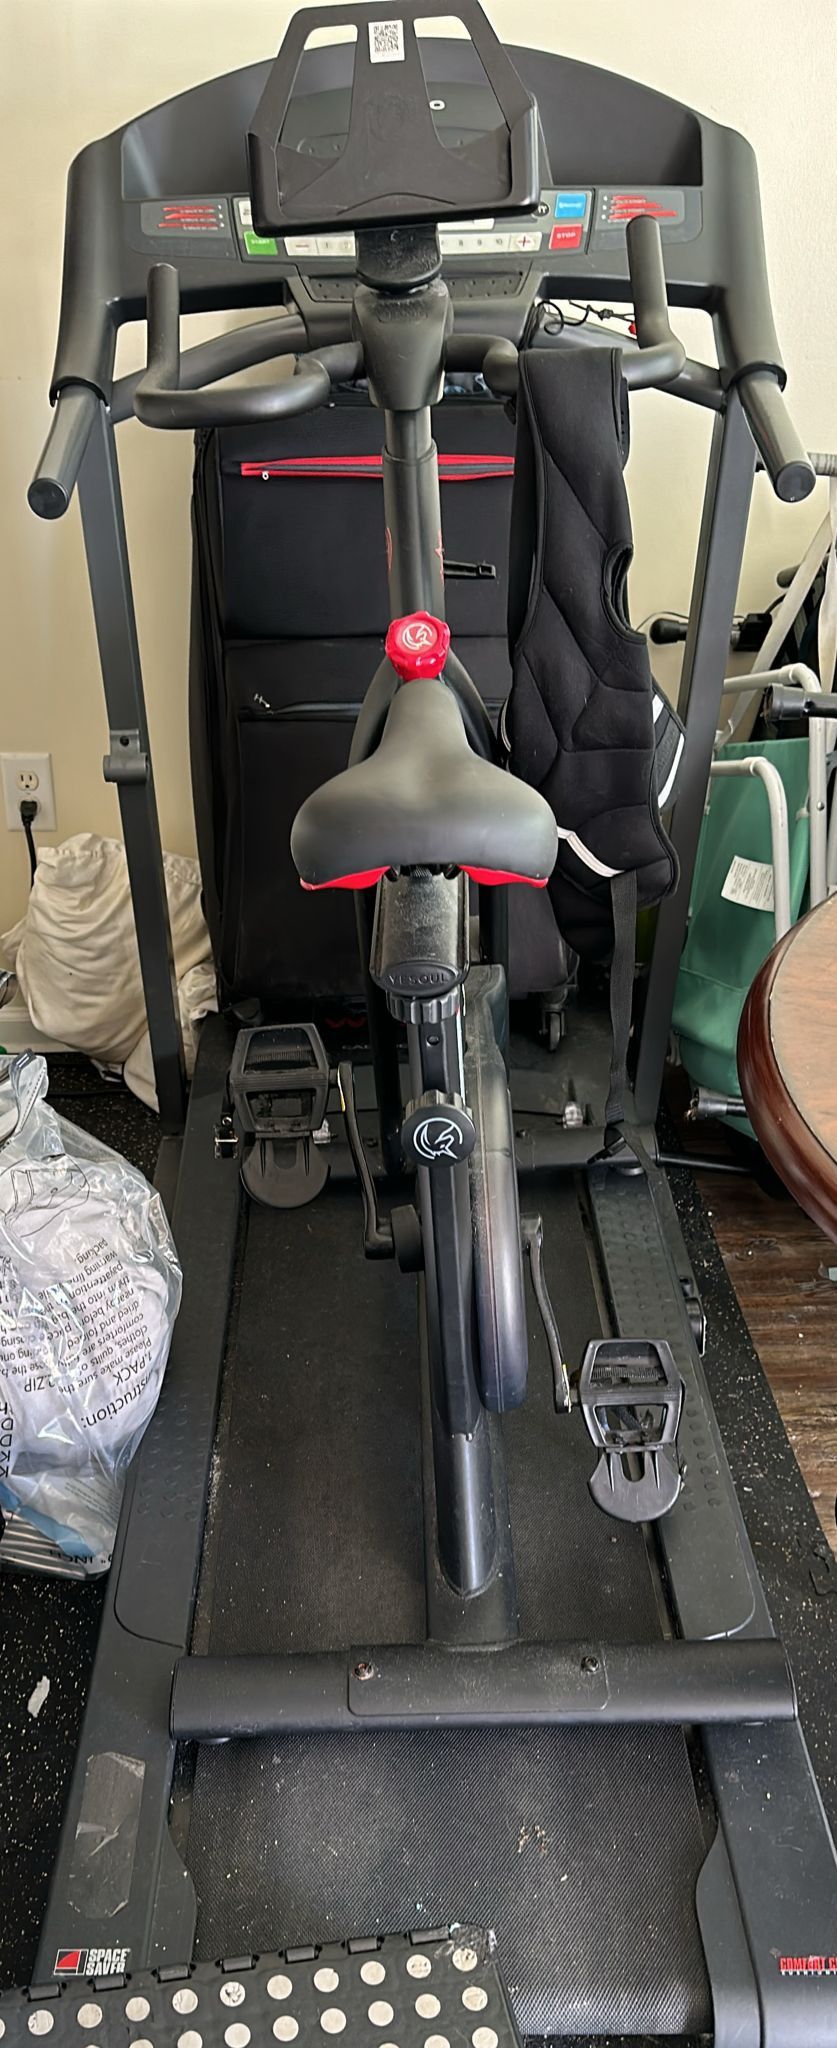 Spinning Bike And Treadmill 